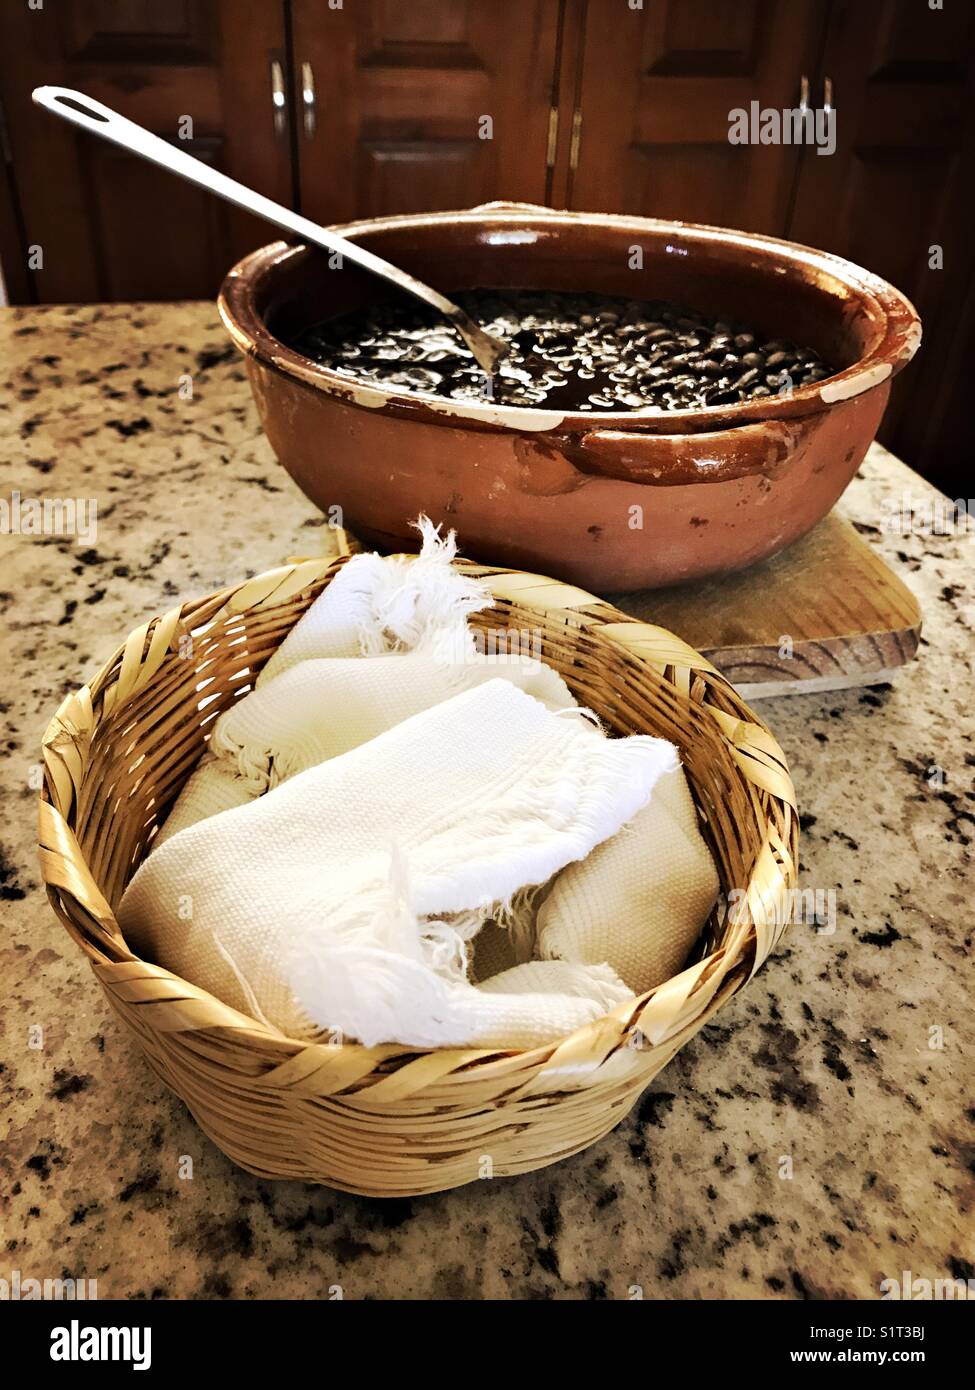 Home cooked traditional Mexican cuisine of black beans and tortillas are ready to serve and eat. Stock Photo